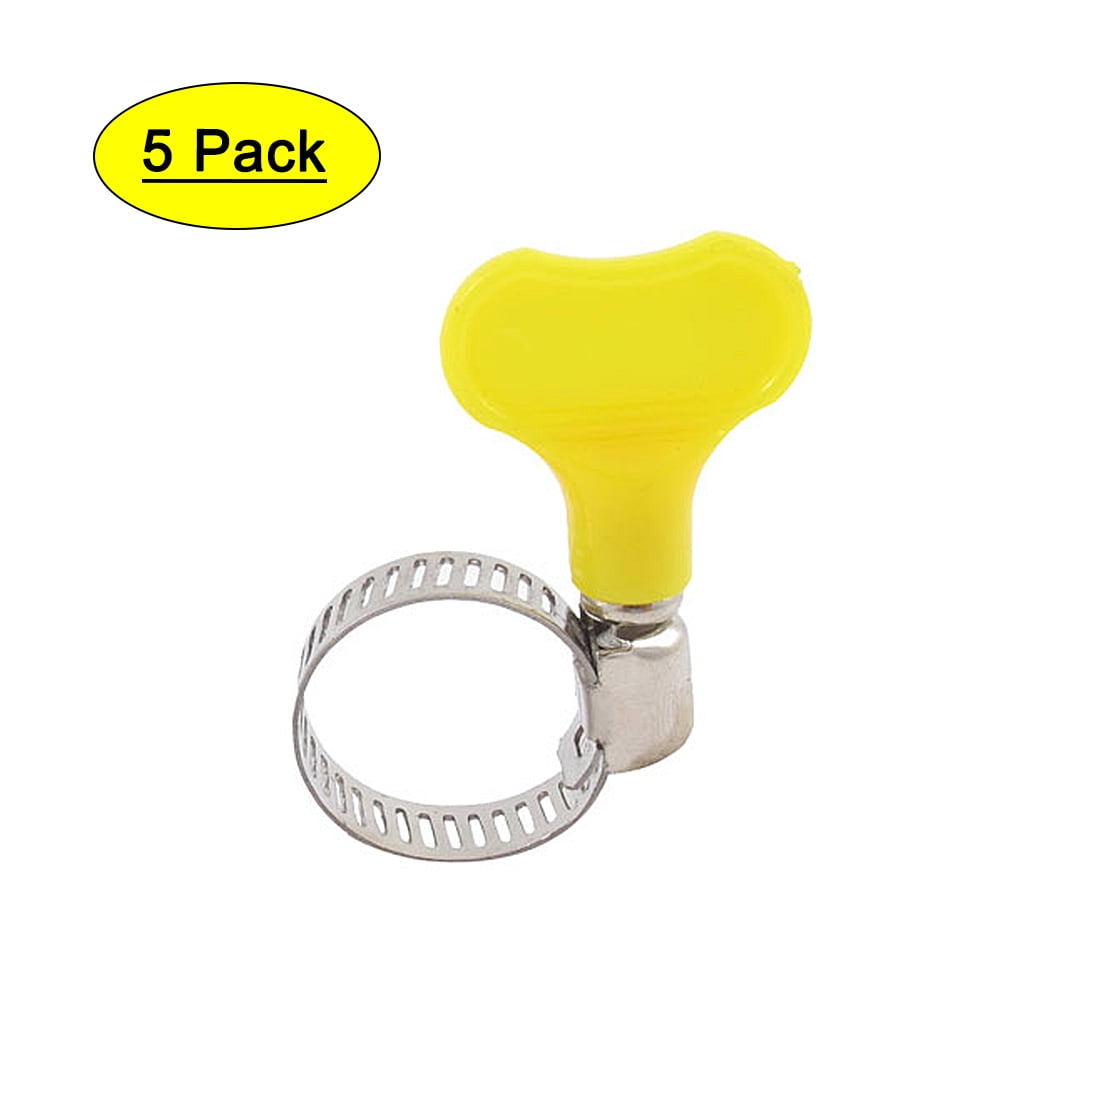 13-25 mm Includes 5 Clamps Band Style 5/16” Wide Adjustable Key Style Stainless Steel Hose Clamps Diameter 1/2” – 1” Easy-Turn Plastic Thumb Screw by Tech Team